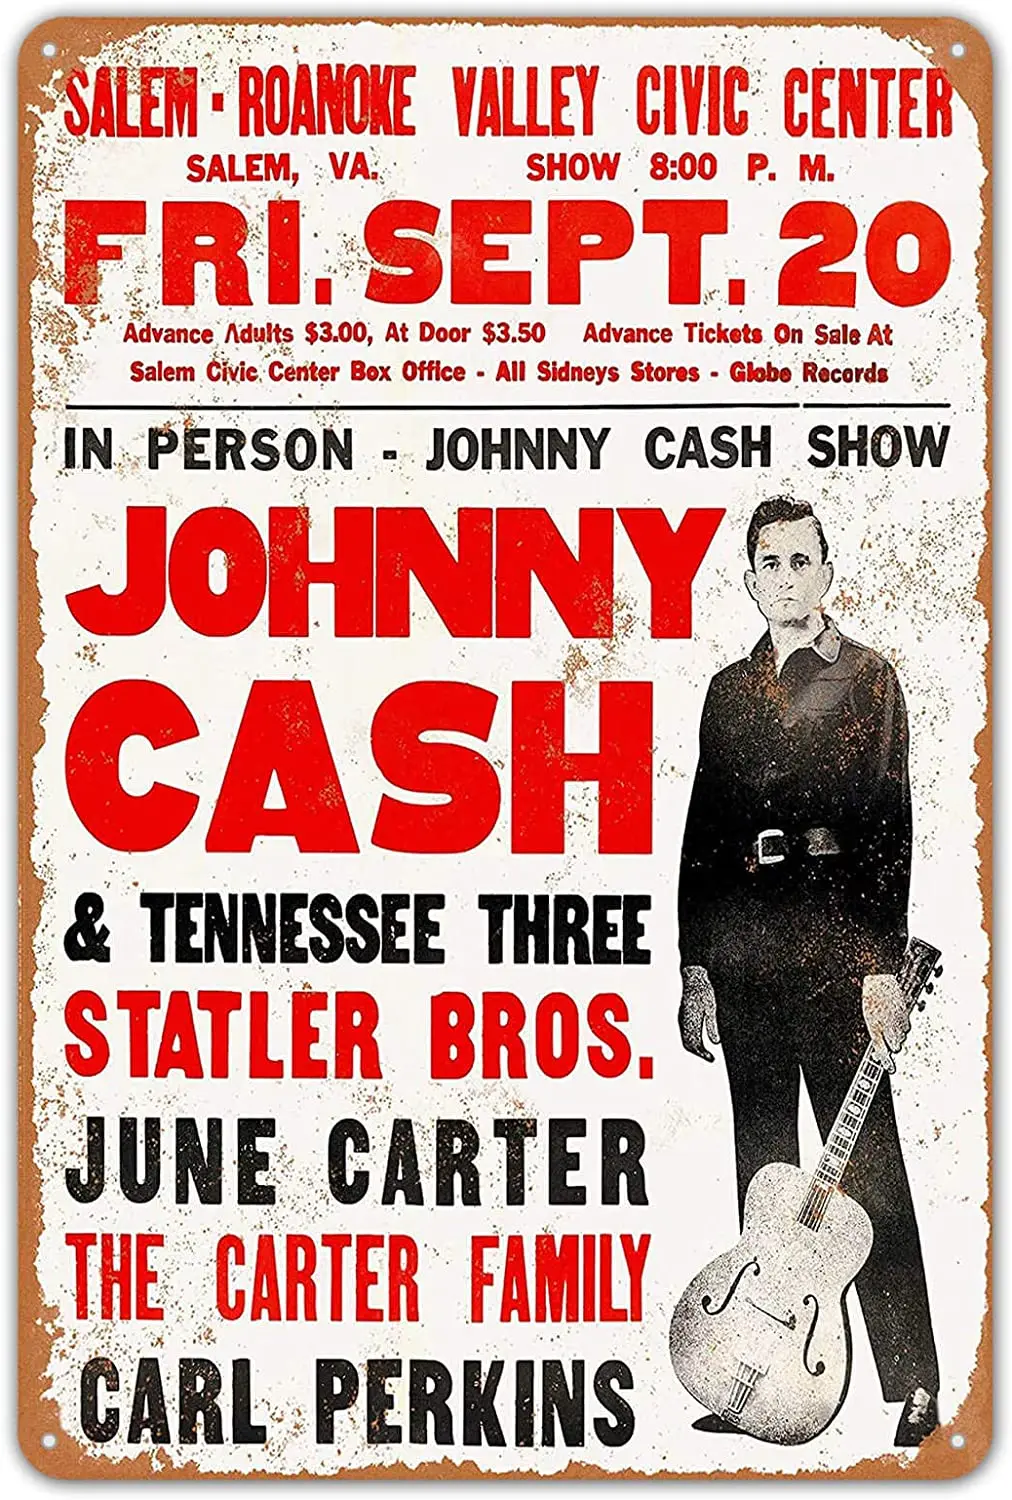 

Tin Sign 1968 Johnny Cash in Virginia Vintage Metal Signs Home Wall Decor, Music Poster for Bar Club Pub Coffee Room